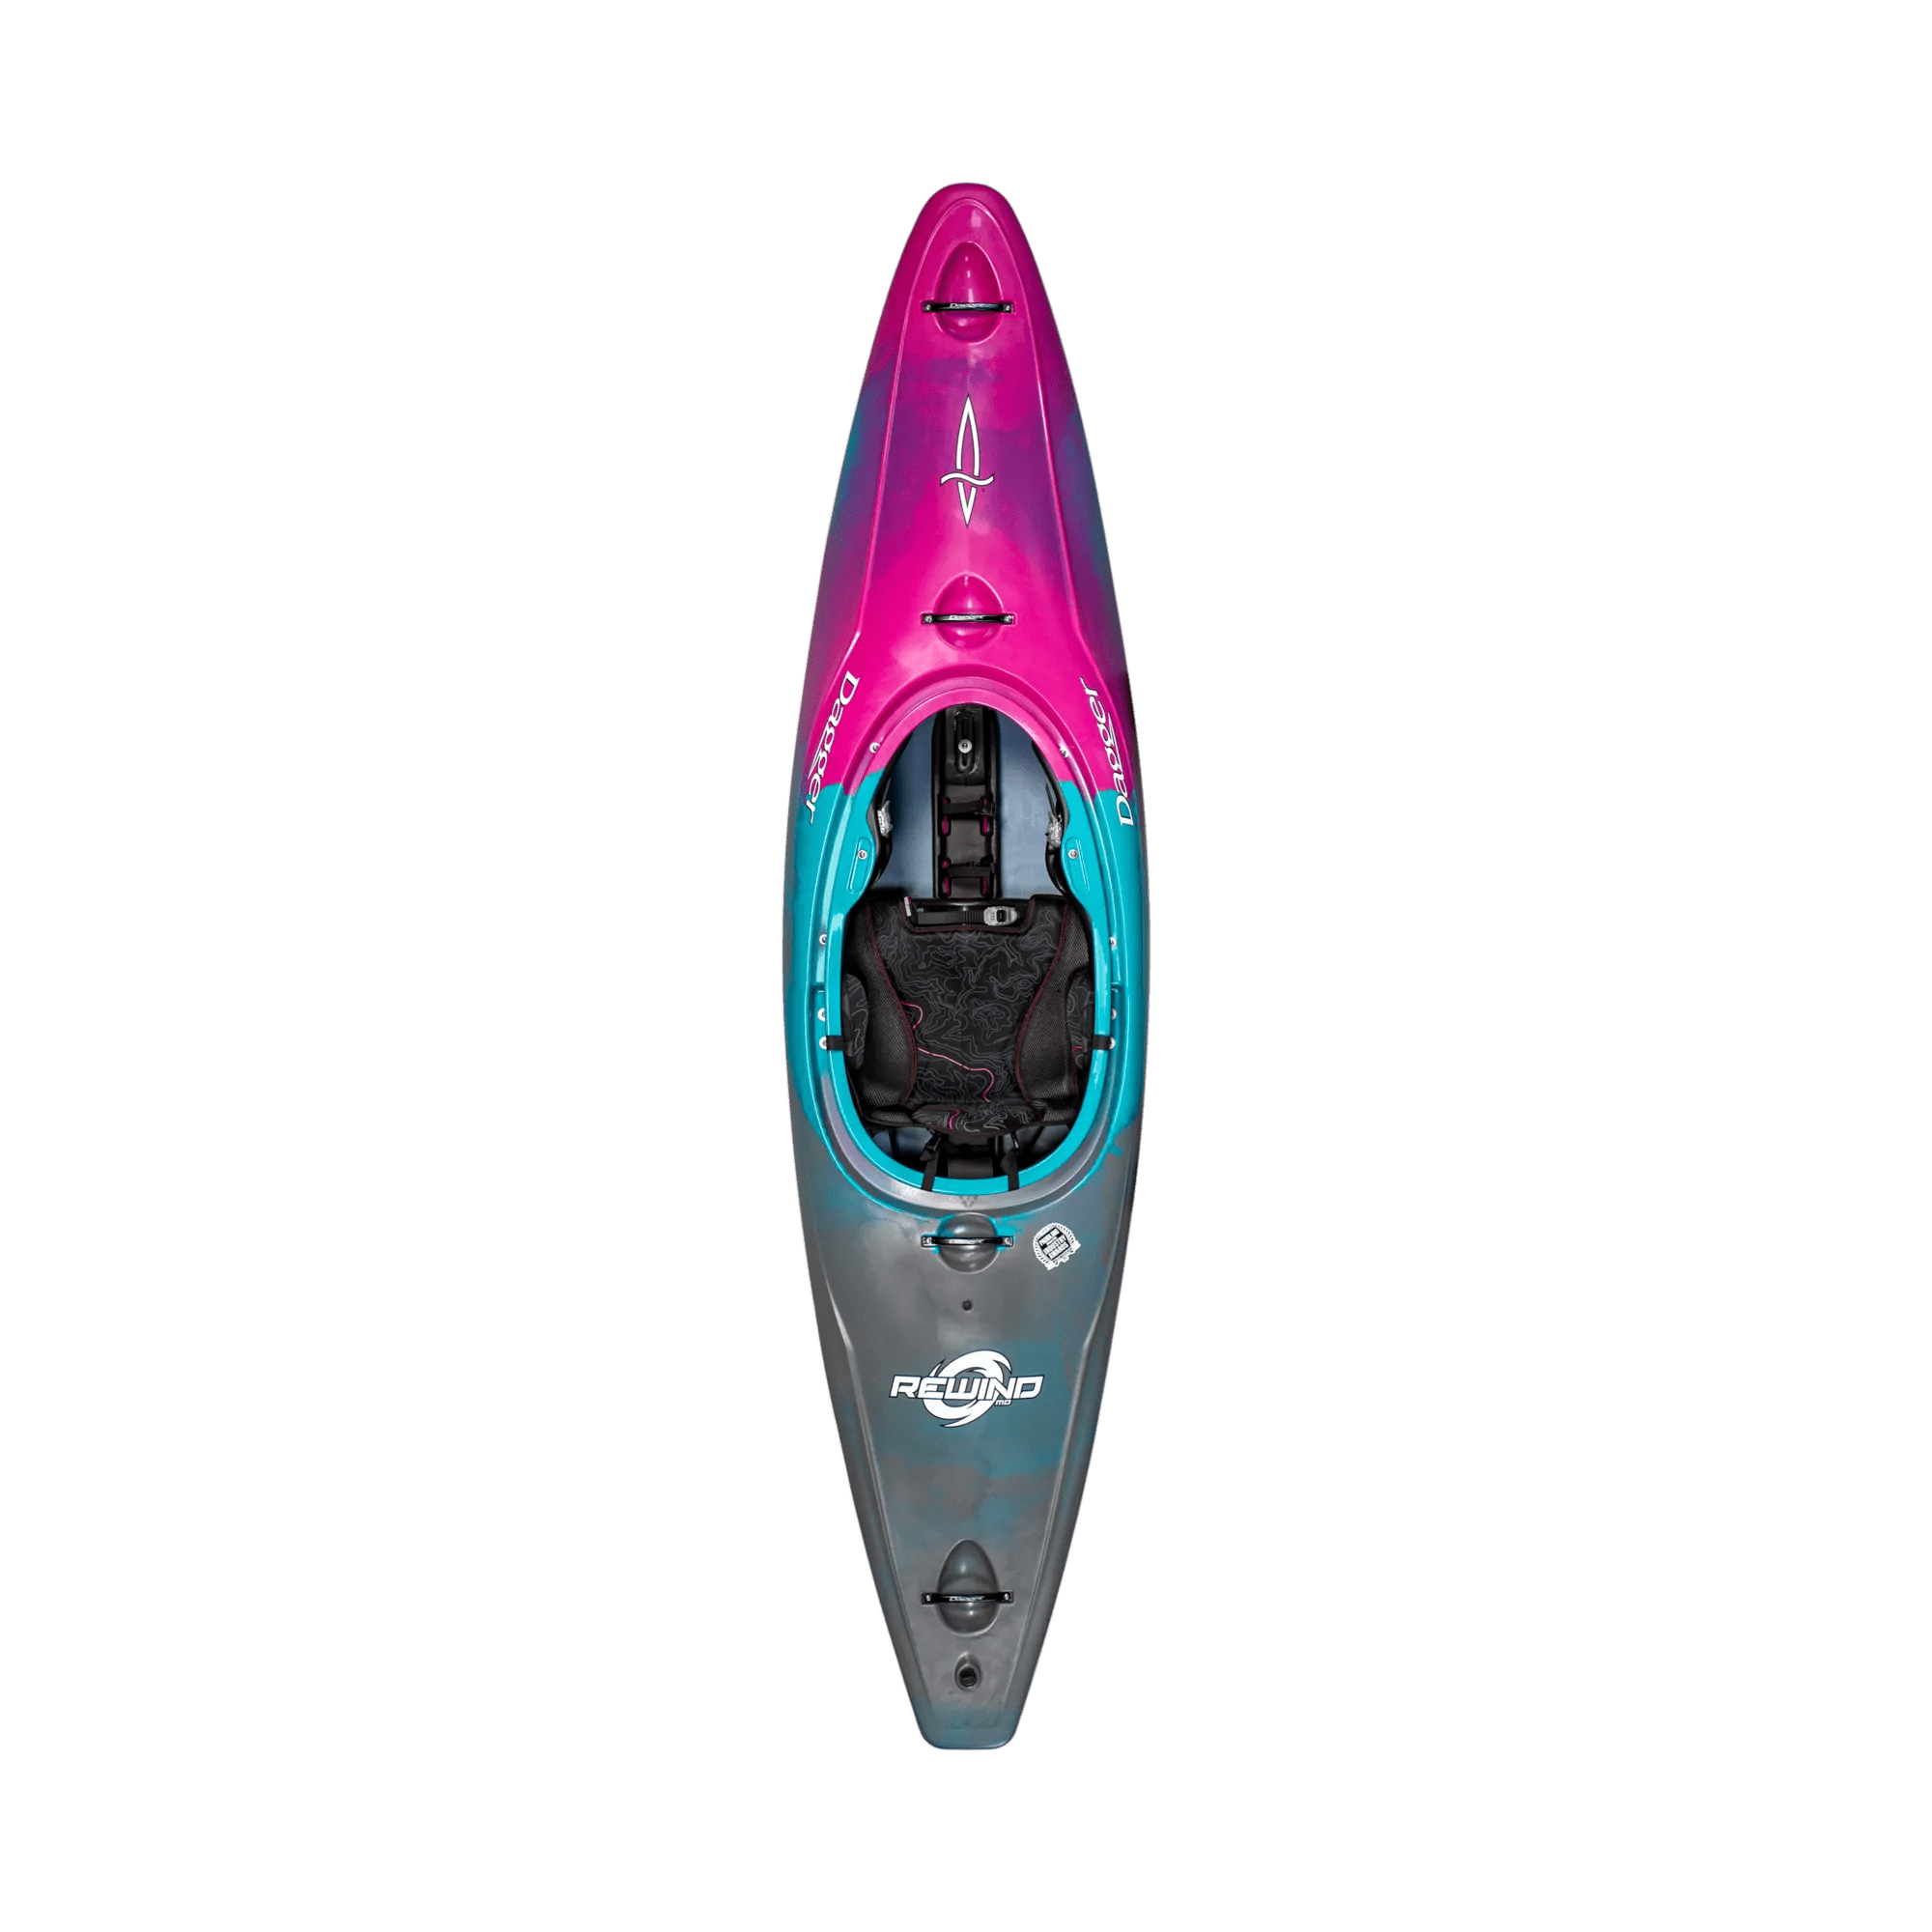 DAGGER - Rewind L River Play Whitewater Kayak - Blue - 9010480196 - TOP 